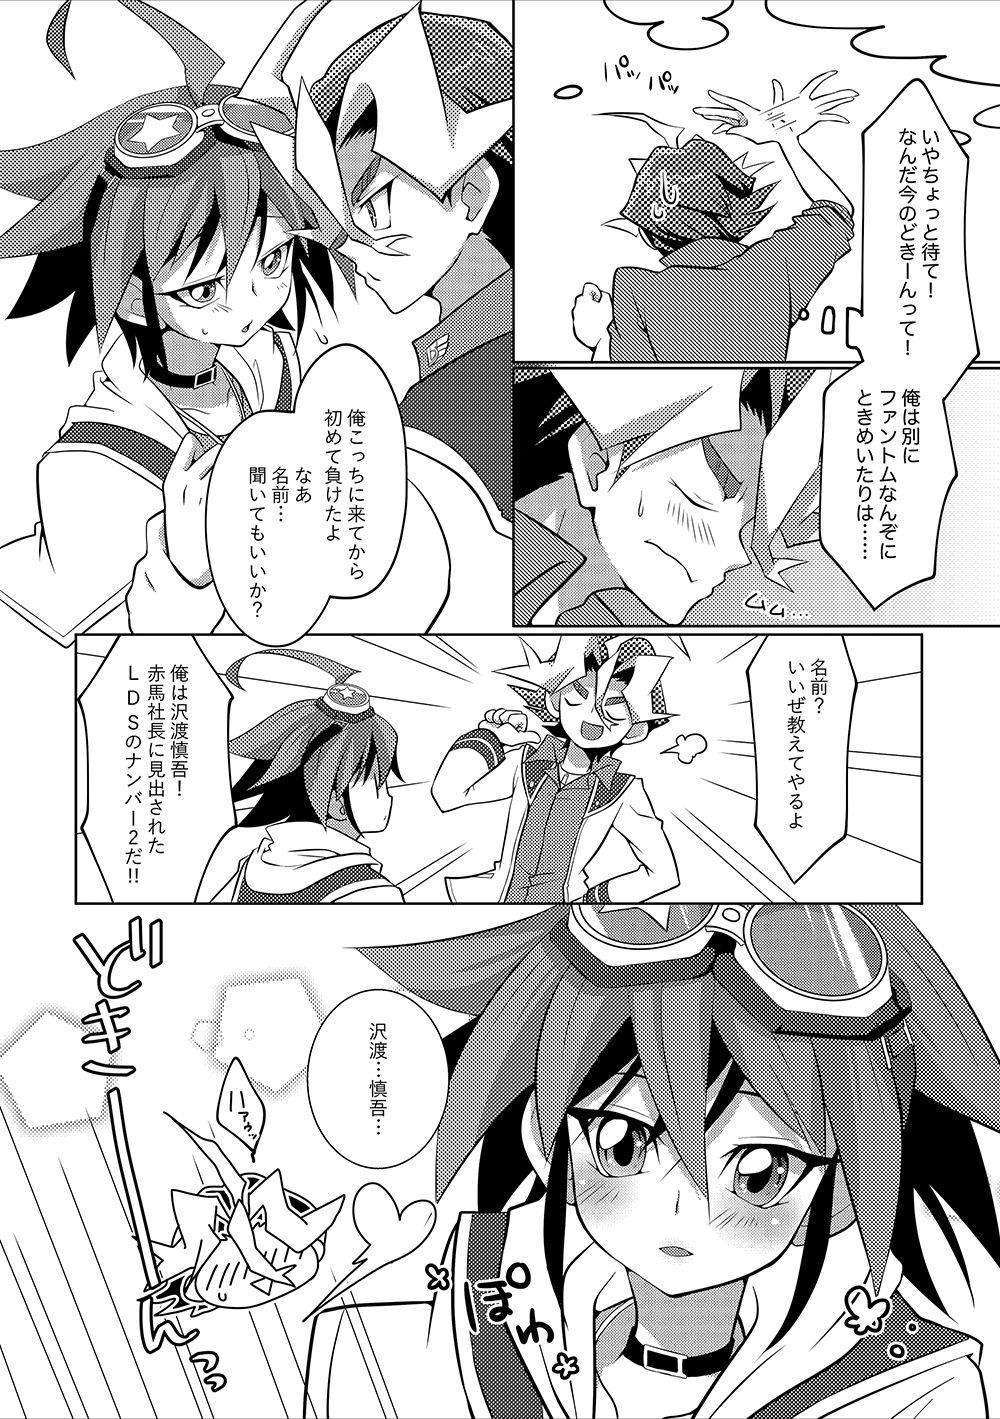 Hiddencam SxS H! ANOTHER - Yu gi oh arc v Asses - Page 5